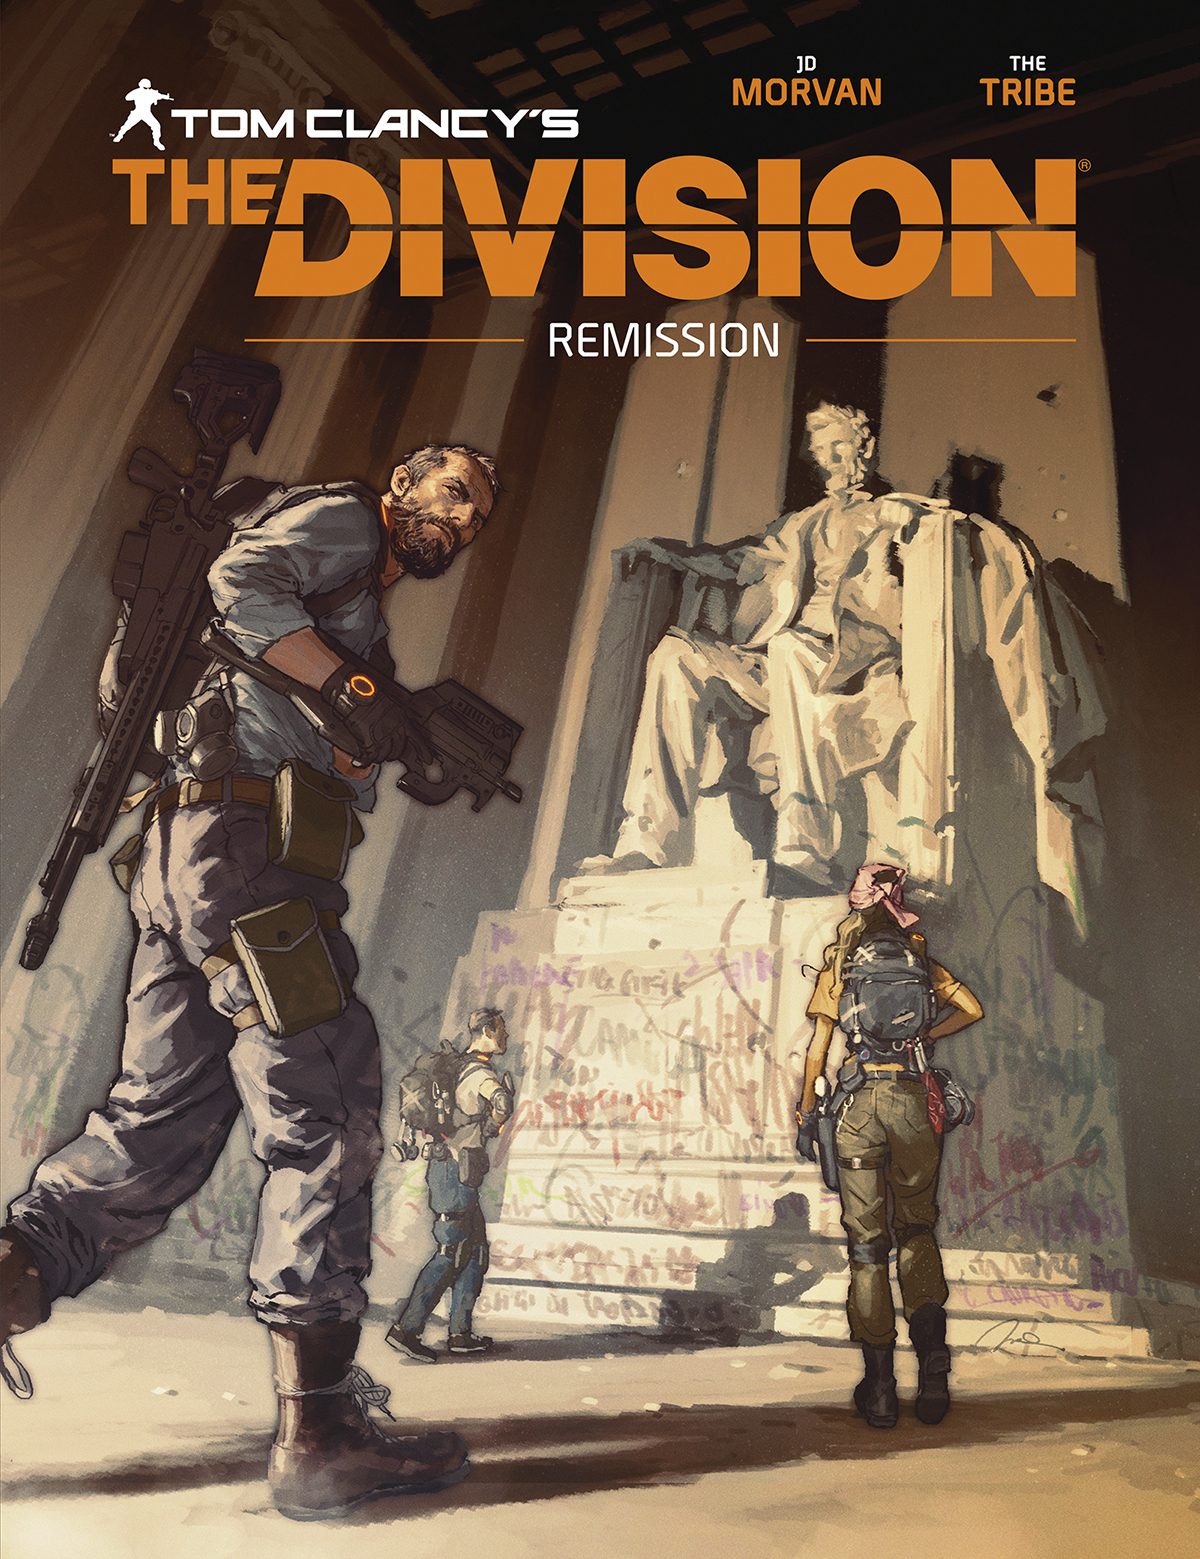 Tom Clancy's The Division Remission Hardcover